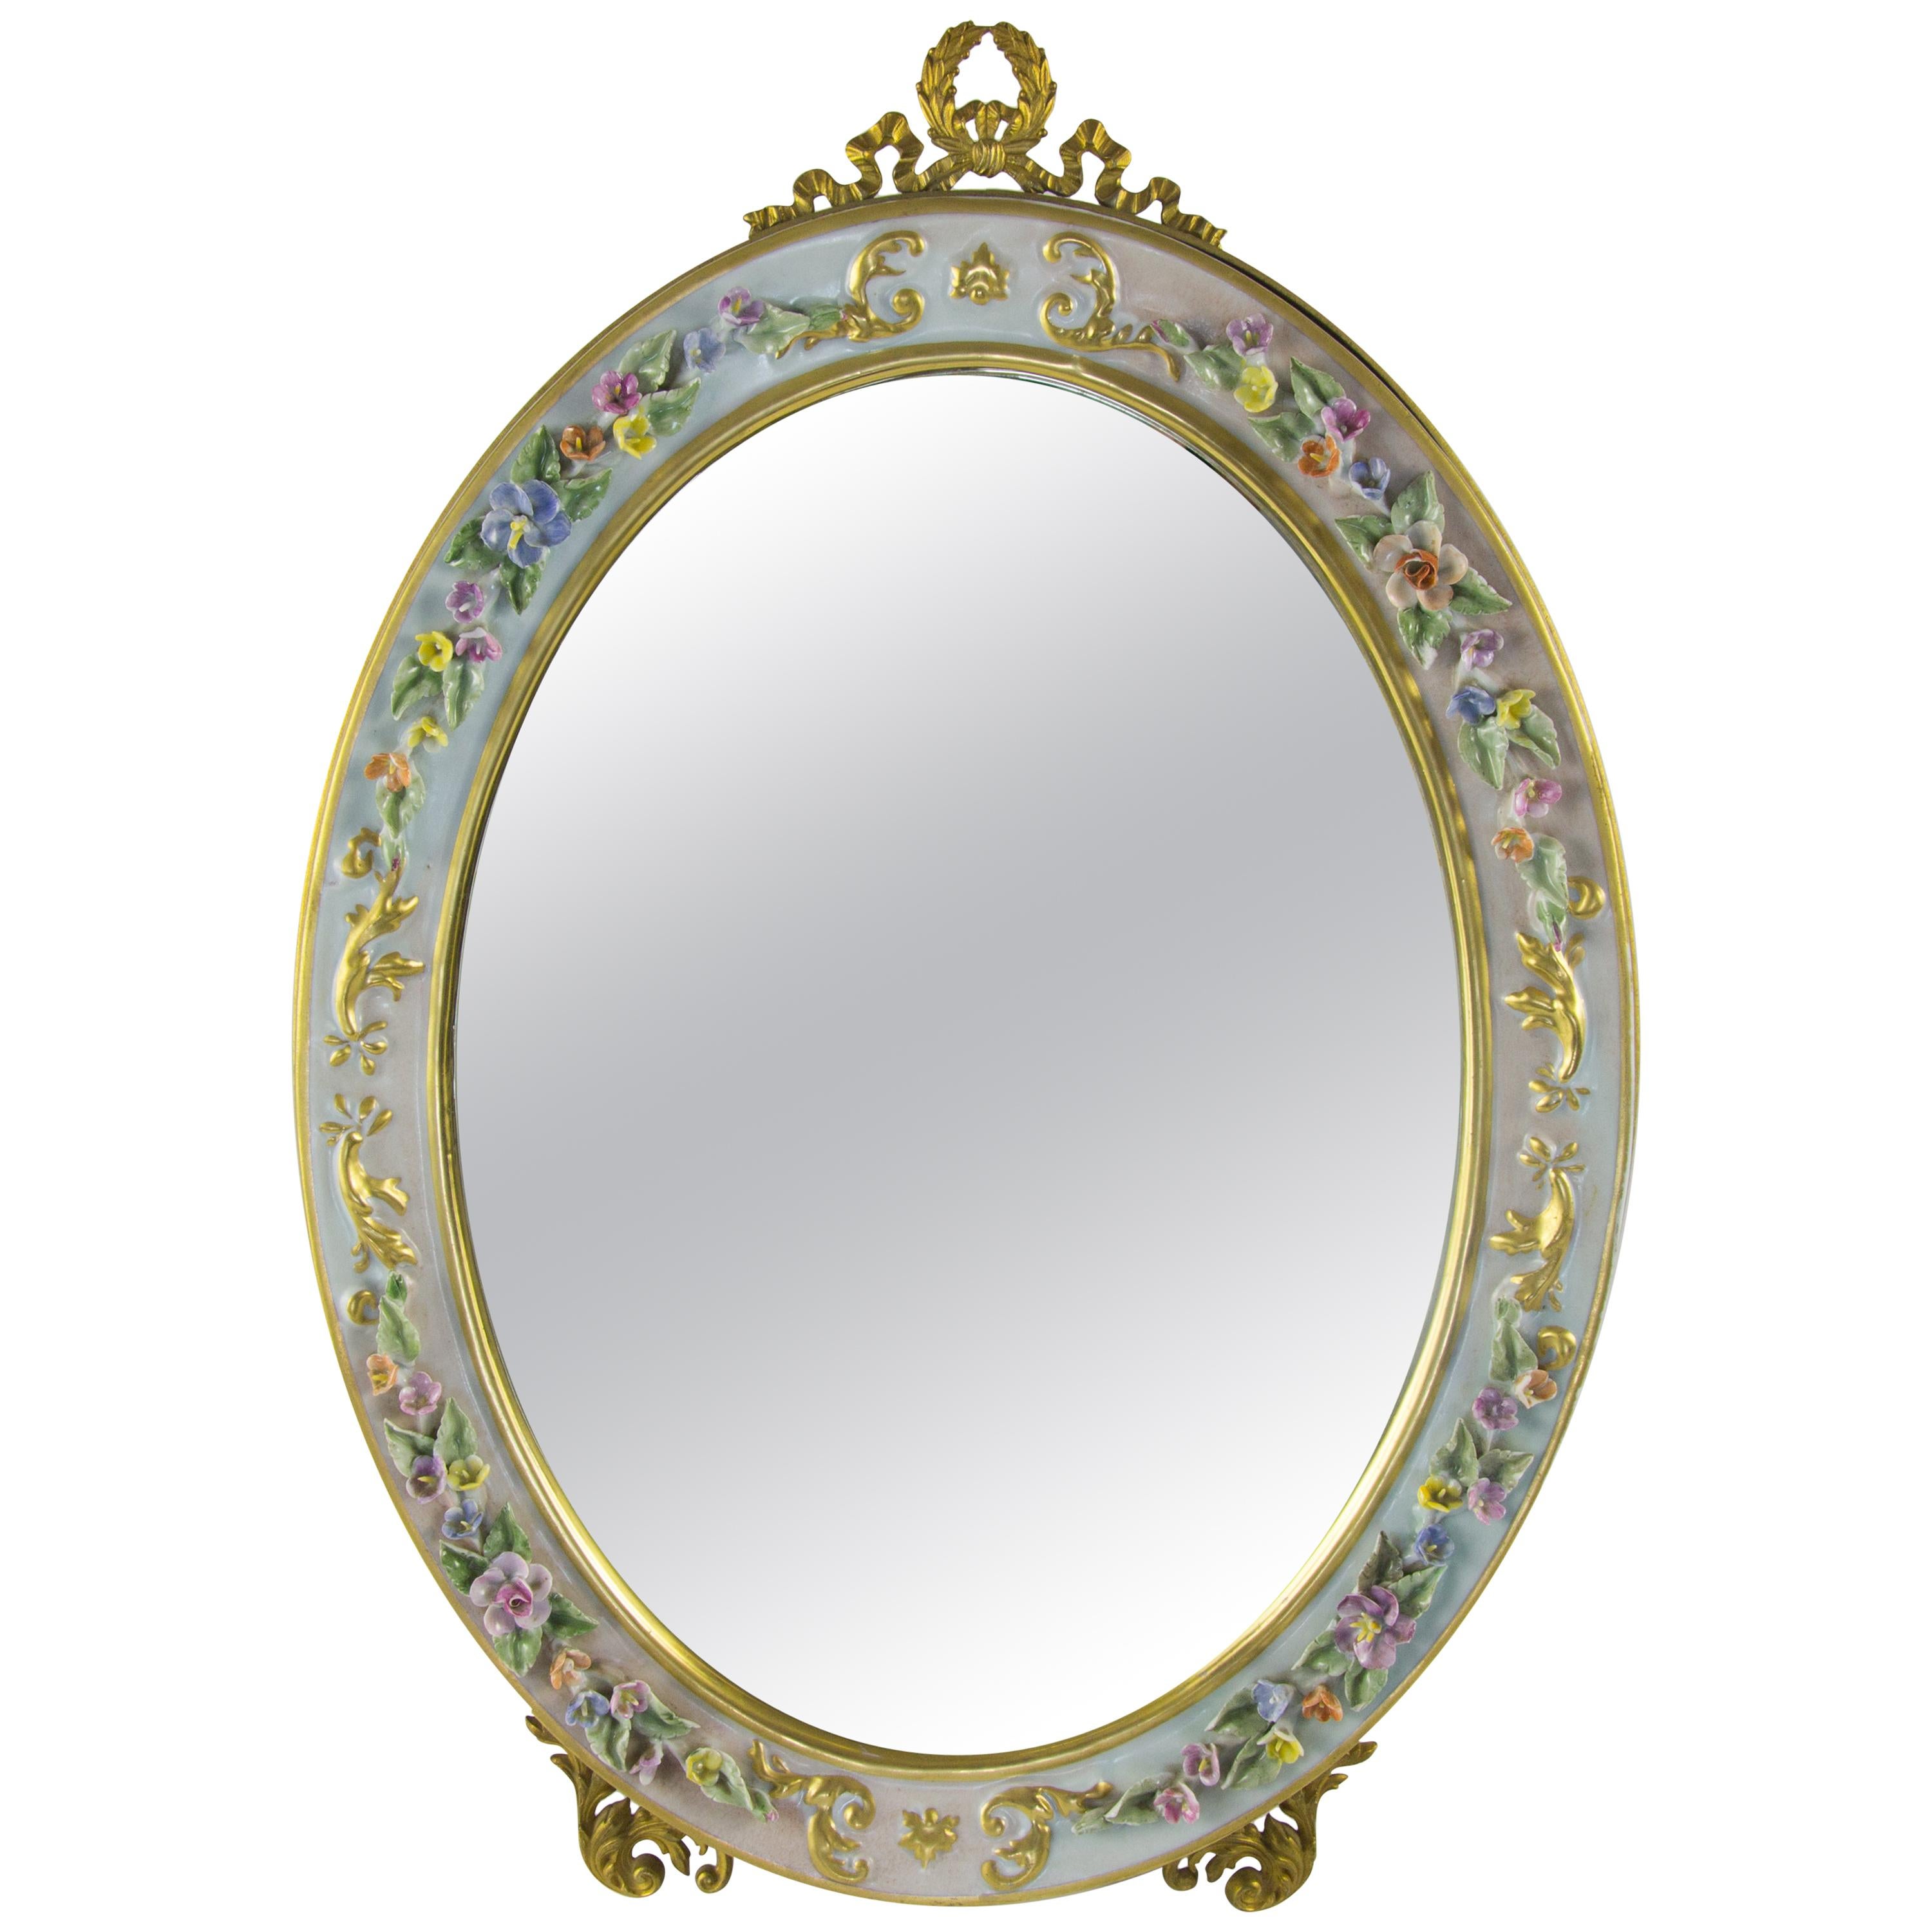 Oval Table Mirror with Floral Porcelain Frame, Italy, 1950s